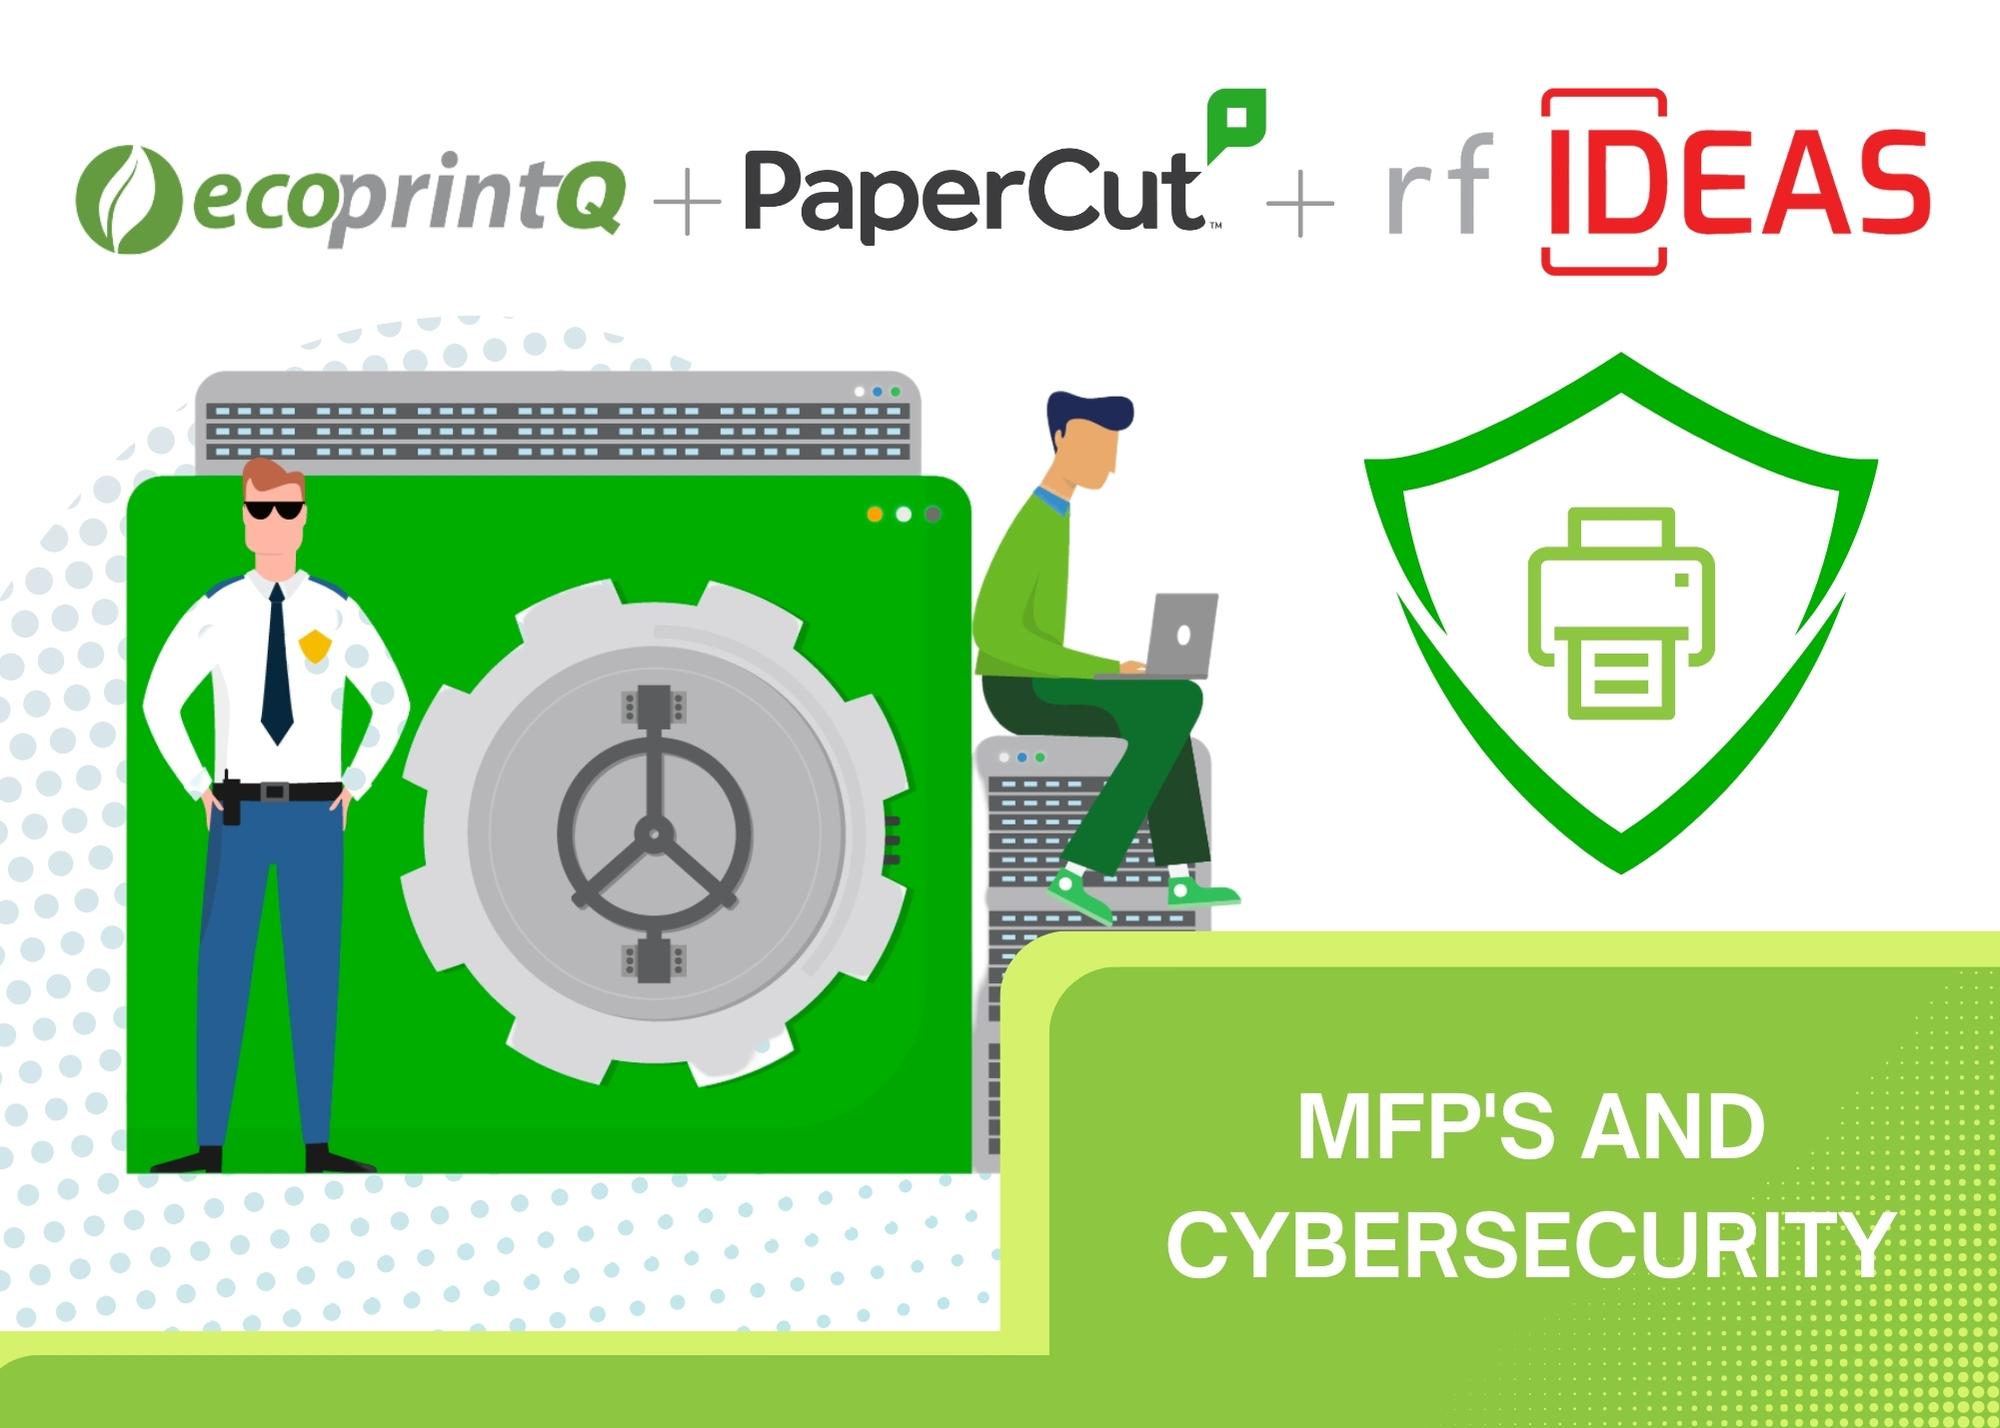 MFP’s and cybersecurity: A quick guide on improving your print security for 2023